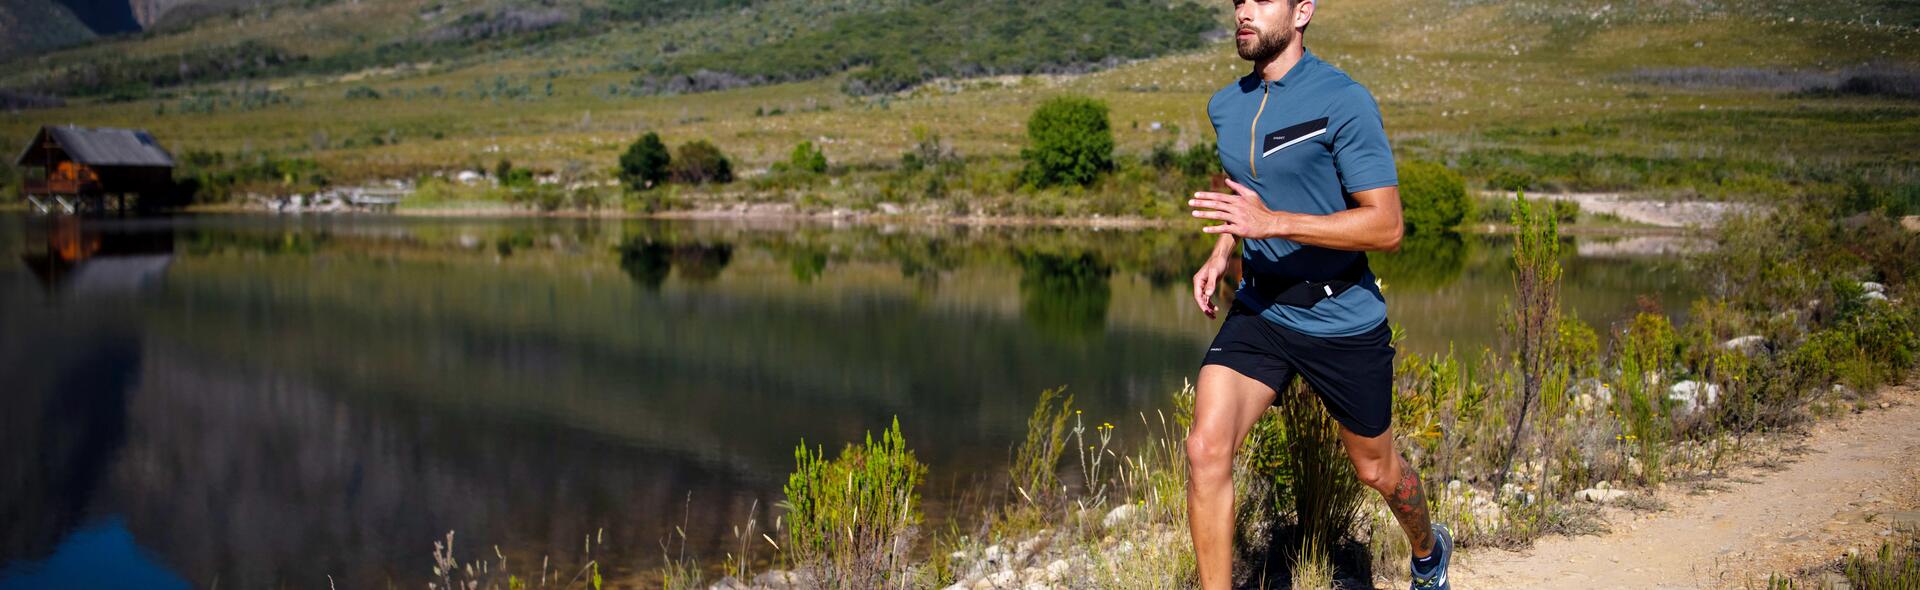 Everything about trail running